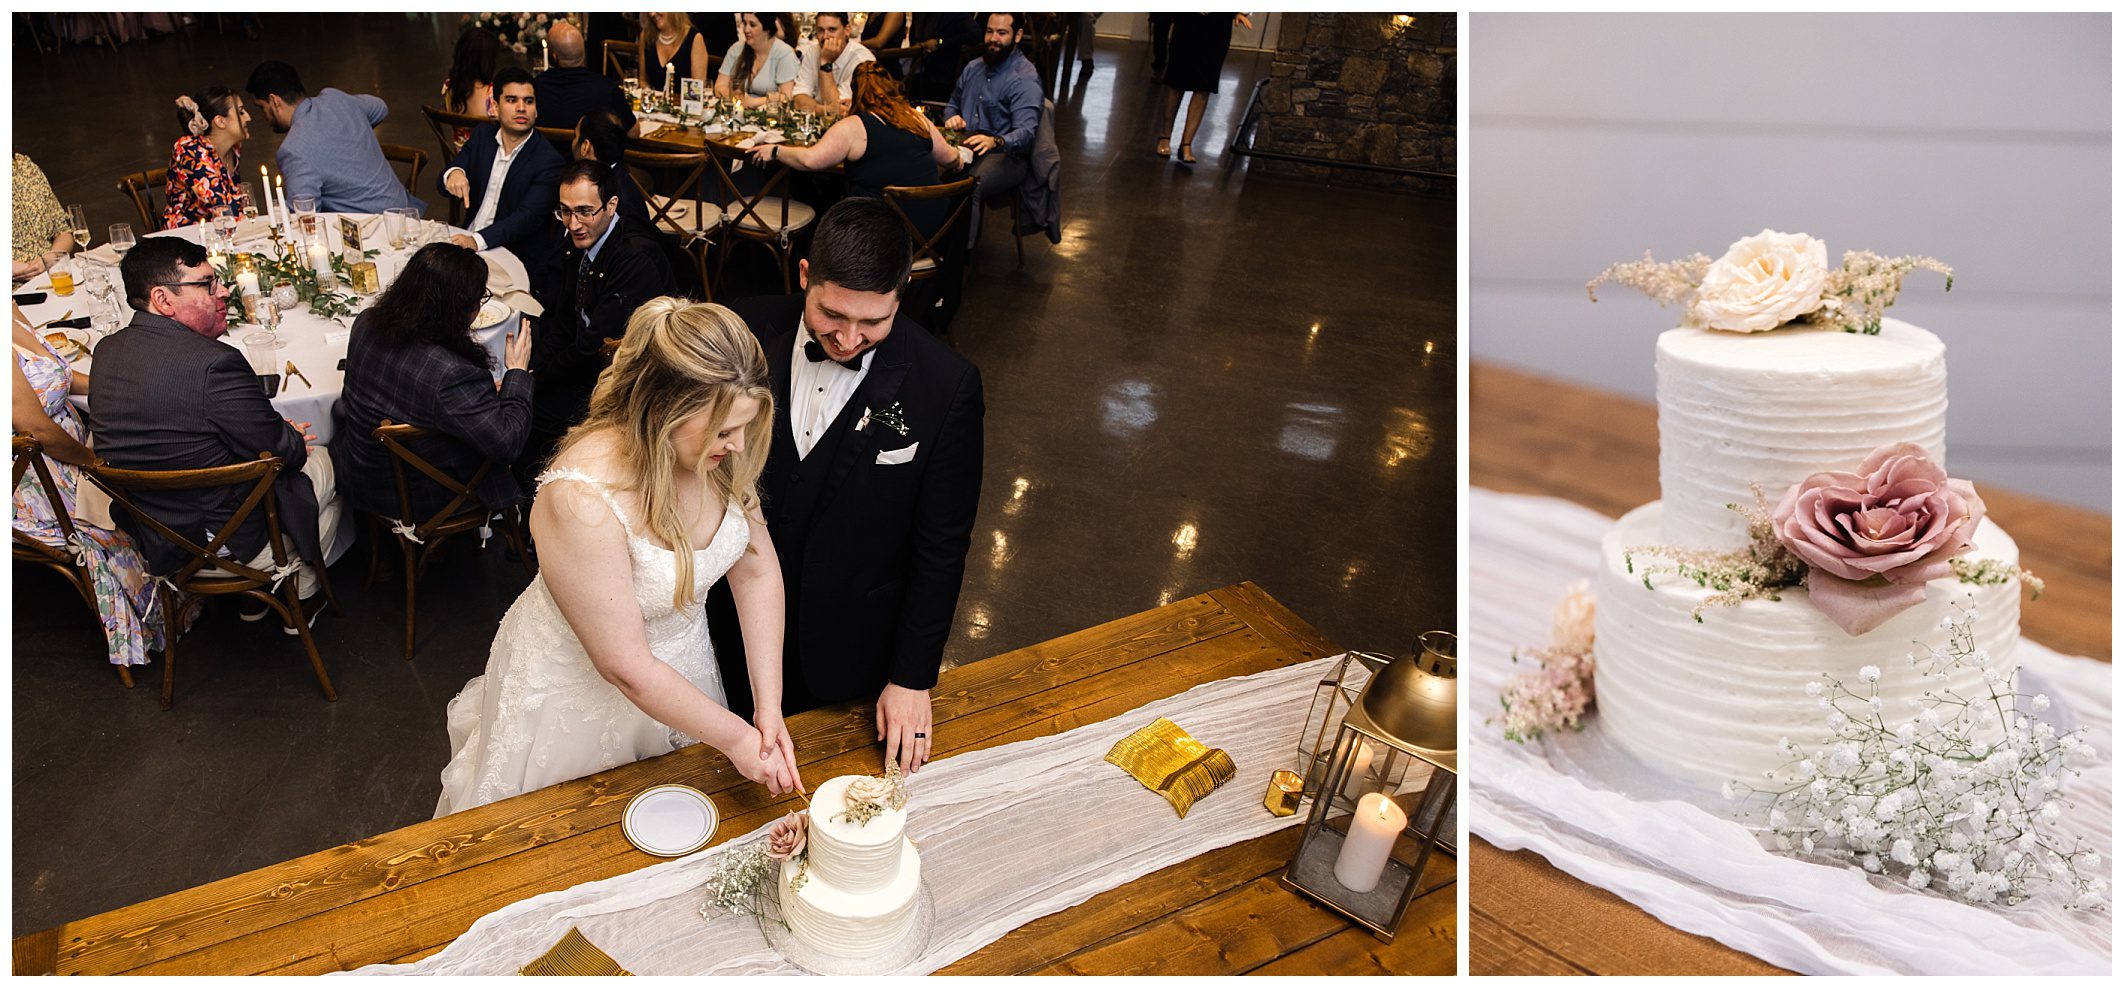 A bride and groom cutting their wedding cake at a mountain reception, surrounded by guests, and a close-up of a white tiered cake decorated with pink flowers.